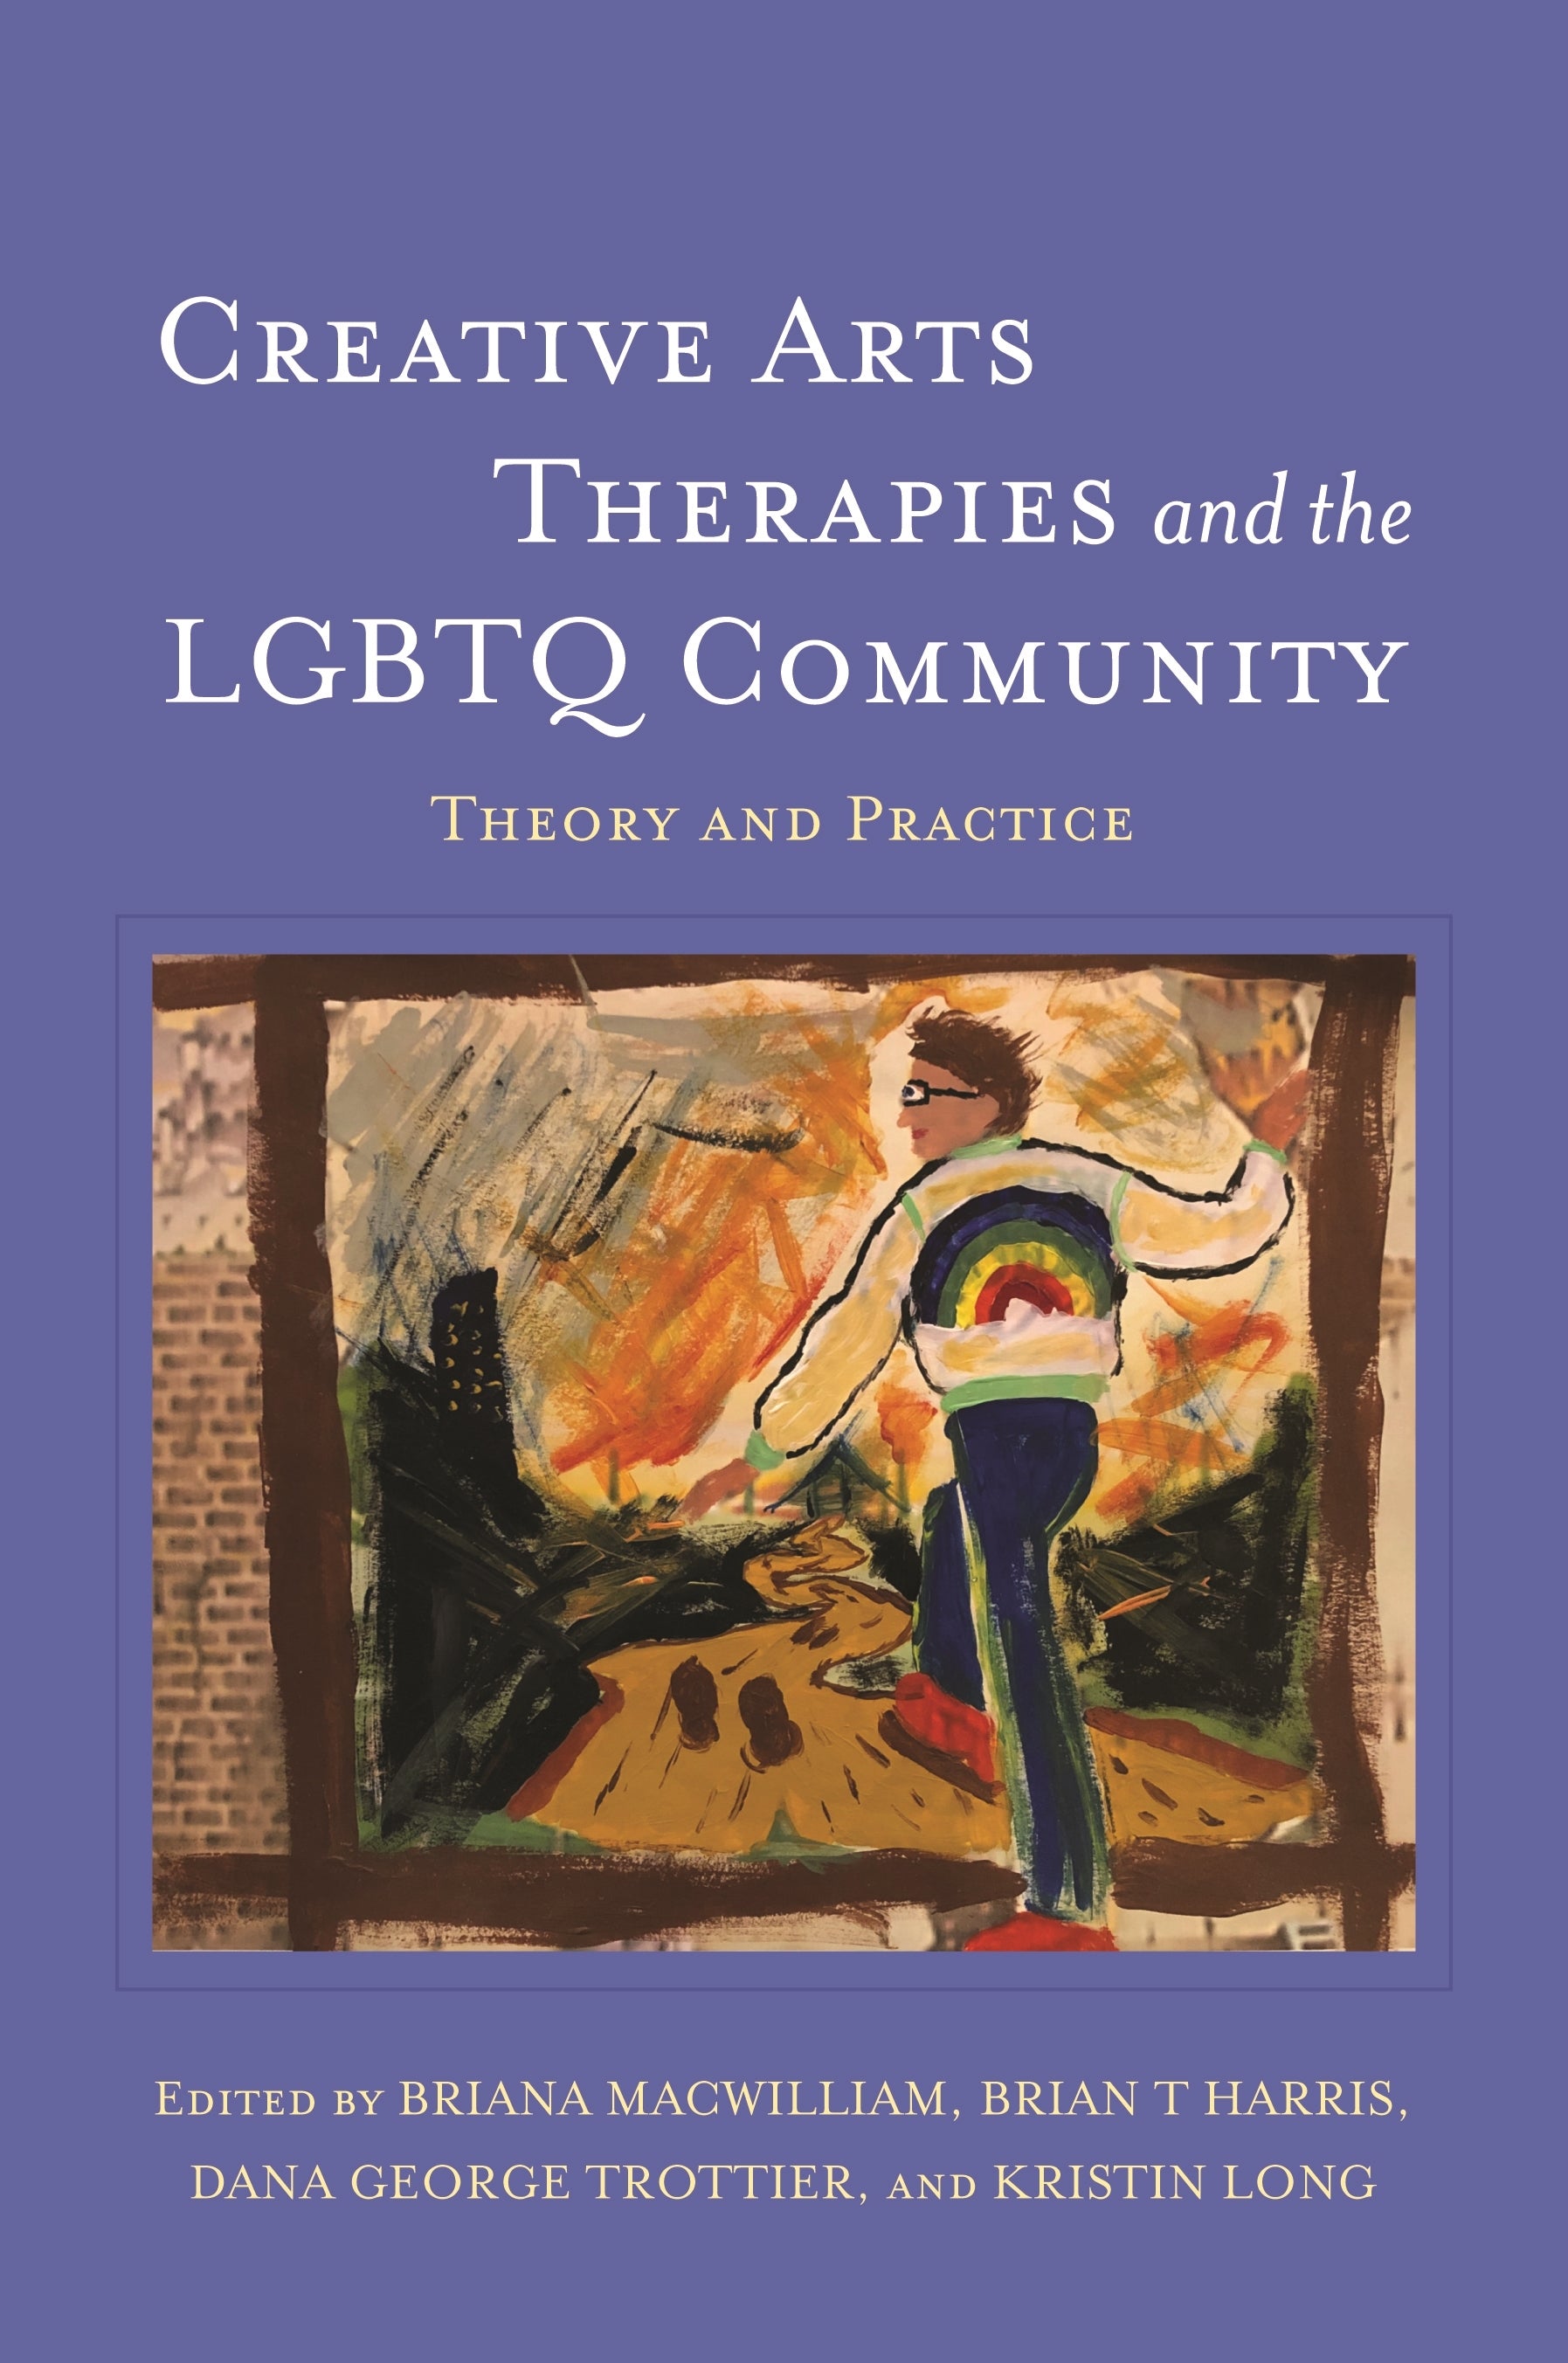 Creative Arts Therapies and the LGBTQ Community by Briana MacWilliam, Brian T Harris, Dana George Trottier, Kristin Long, No Author Listed